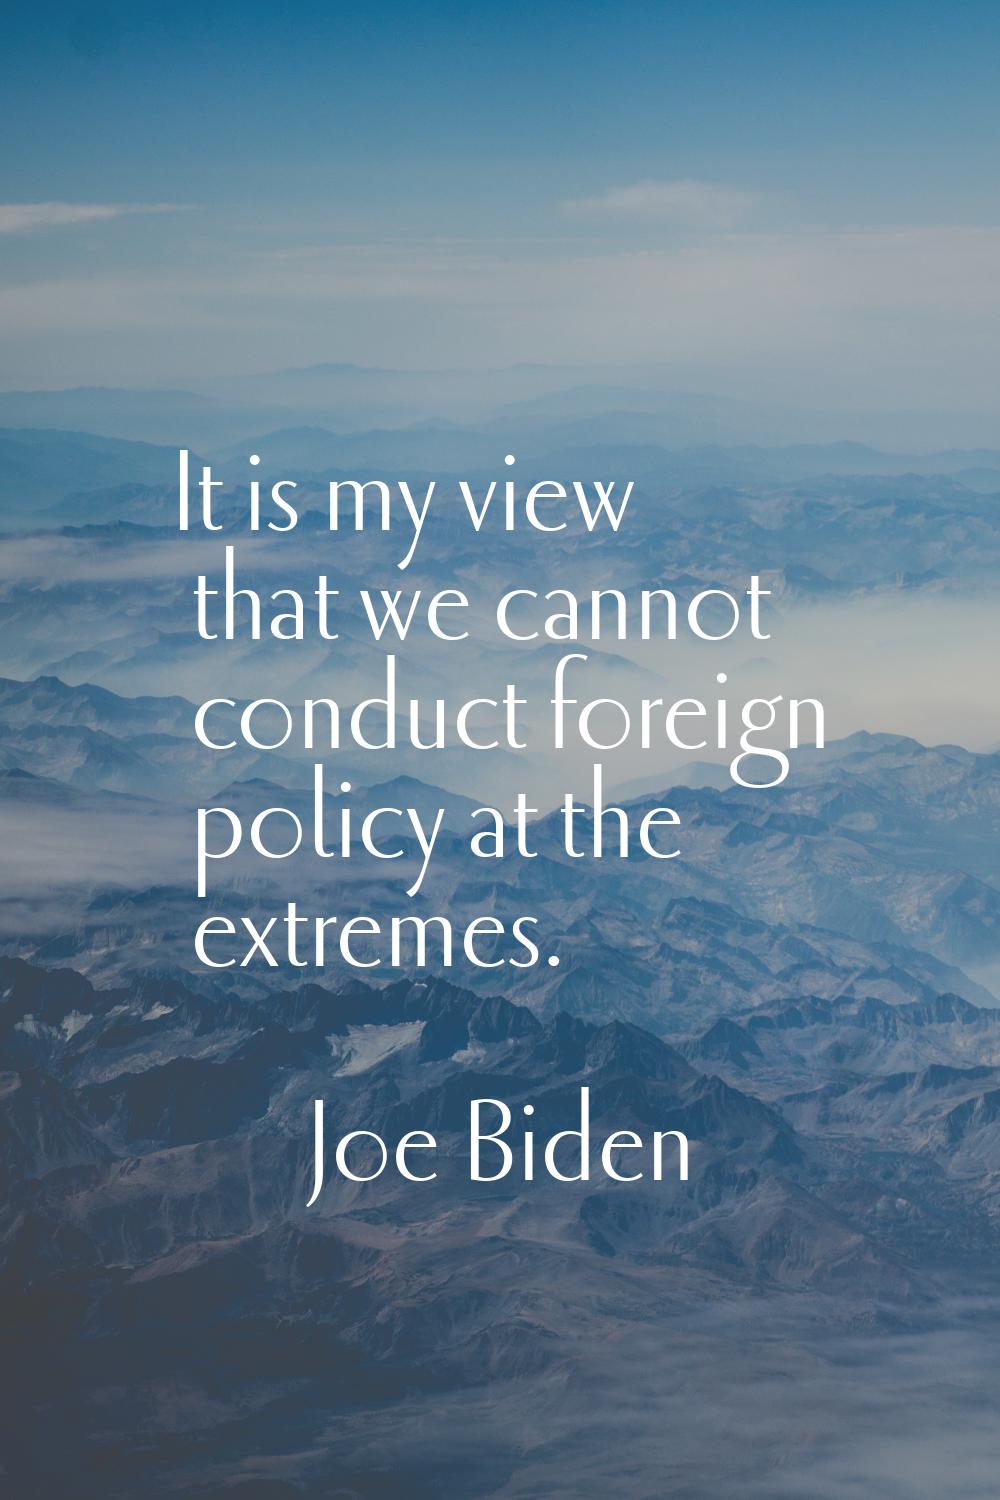 It is my view that we cannot conduct foreign policy at the extremes.